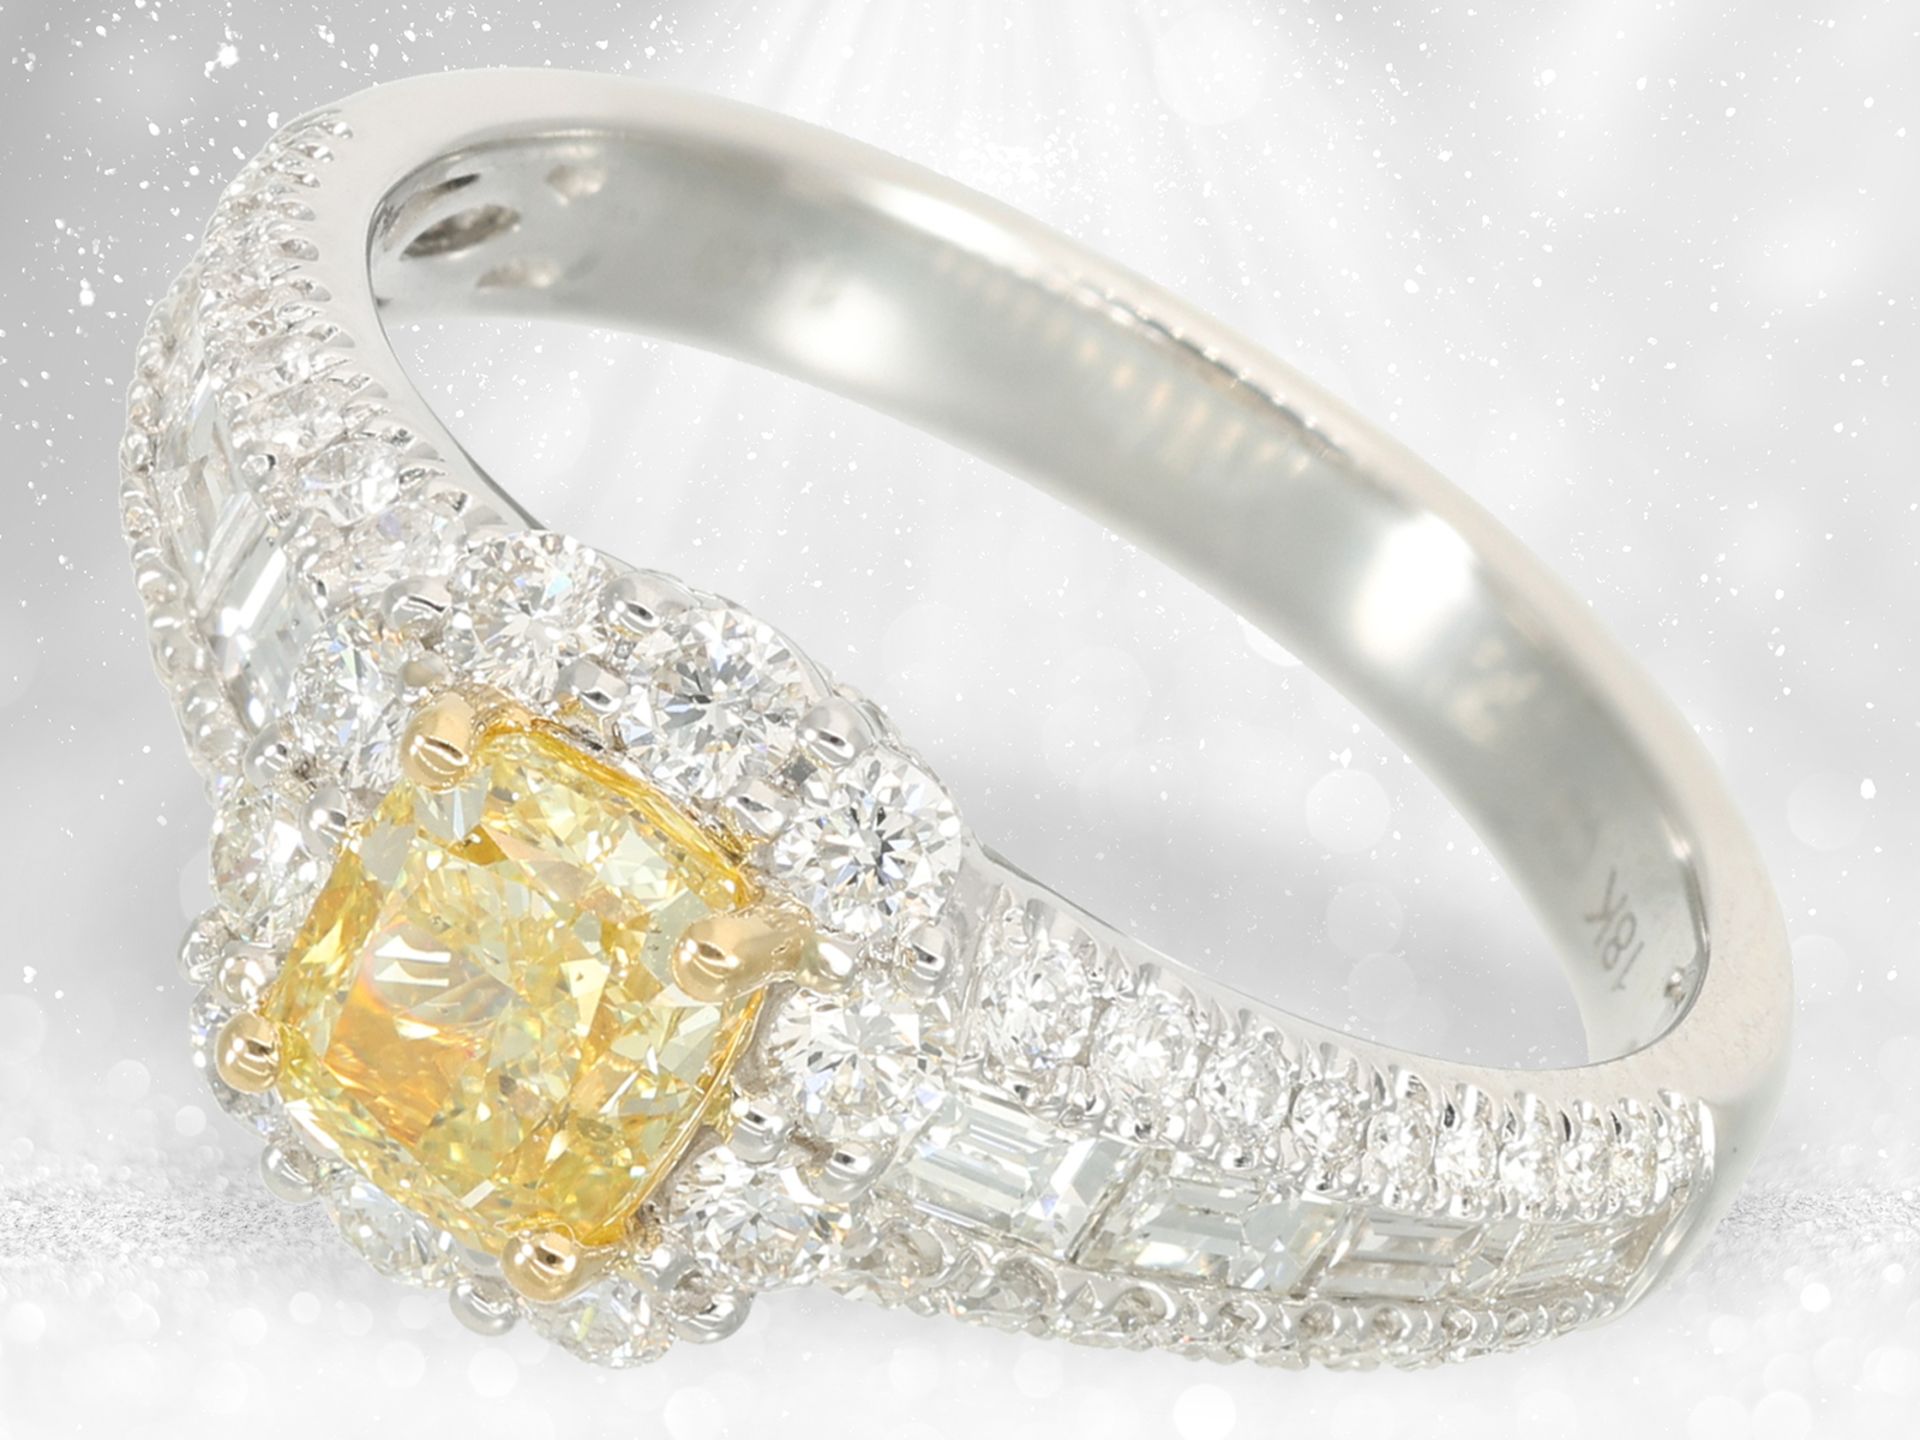 Ring: elaborately designed diamond ring, centre stone Fancy Yellow 1ct, GIA certificate